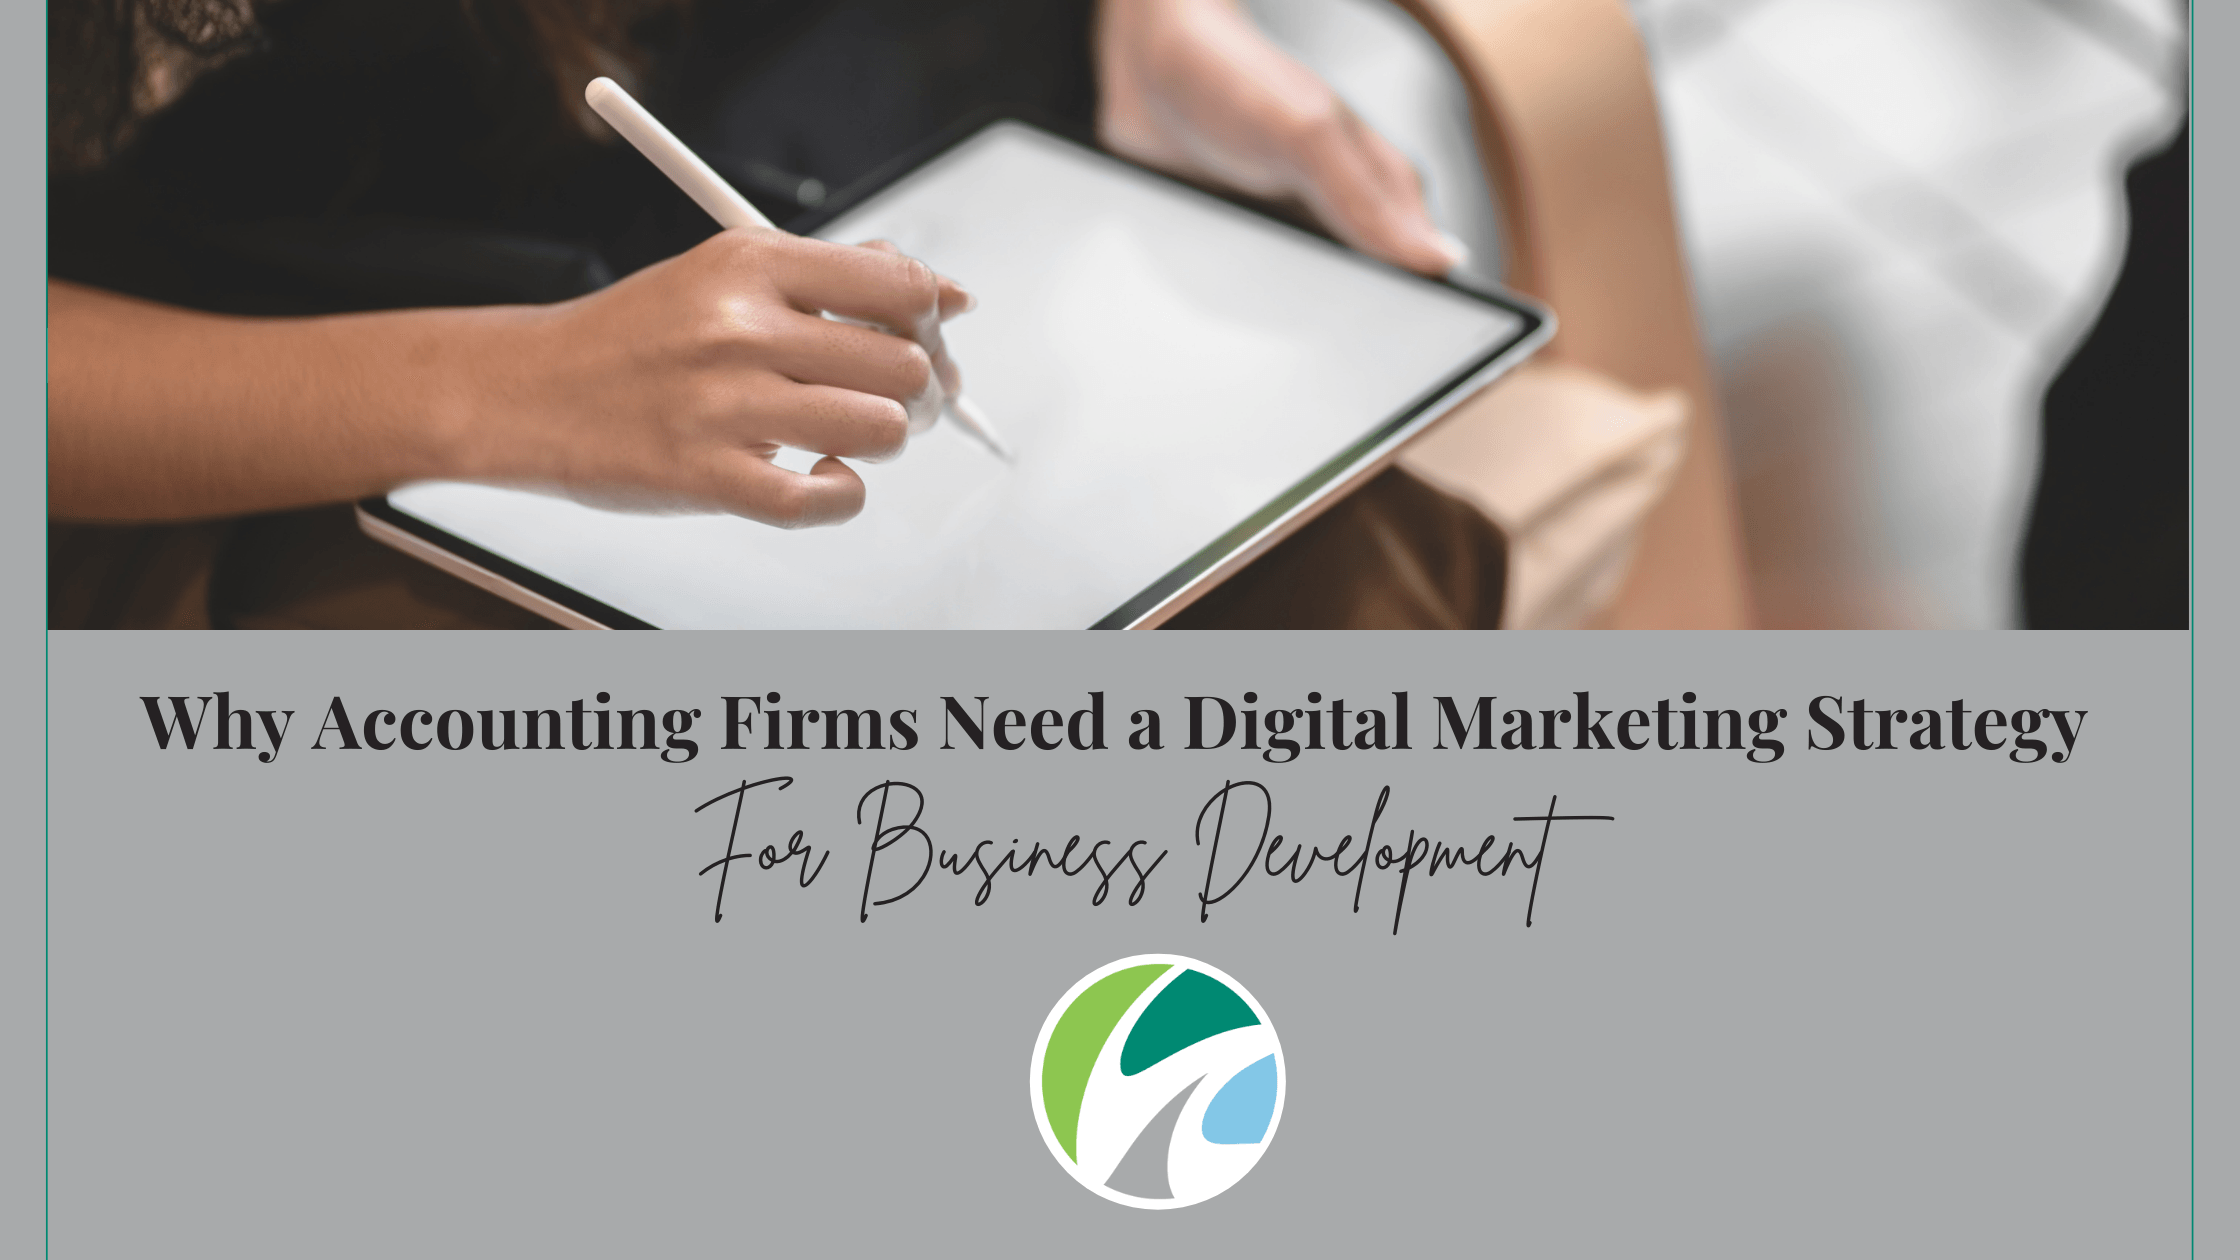 Why Accounting Firms Need a Digital Marketing Strategy for Business Development